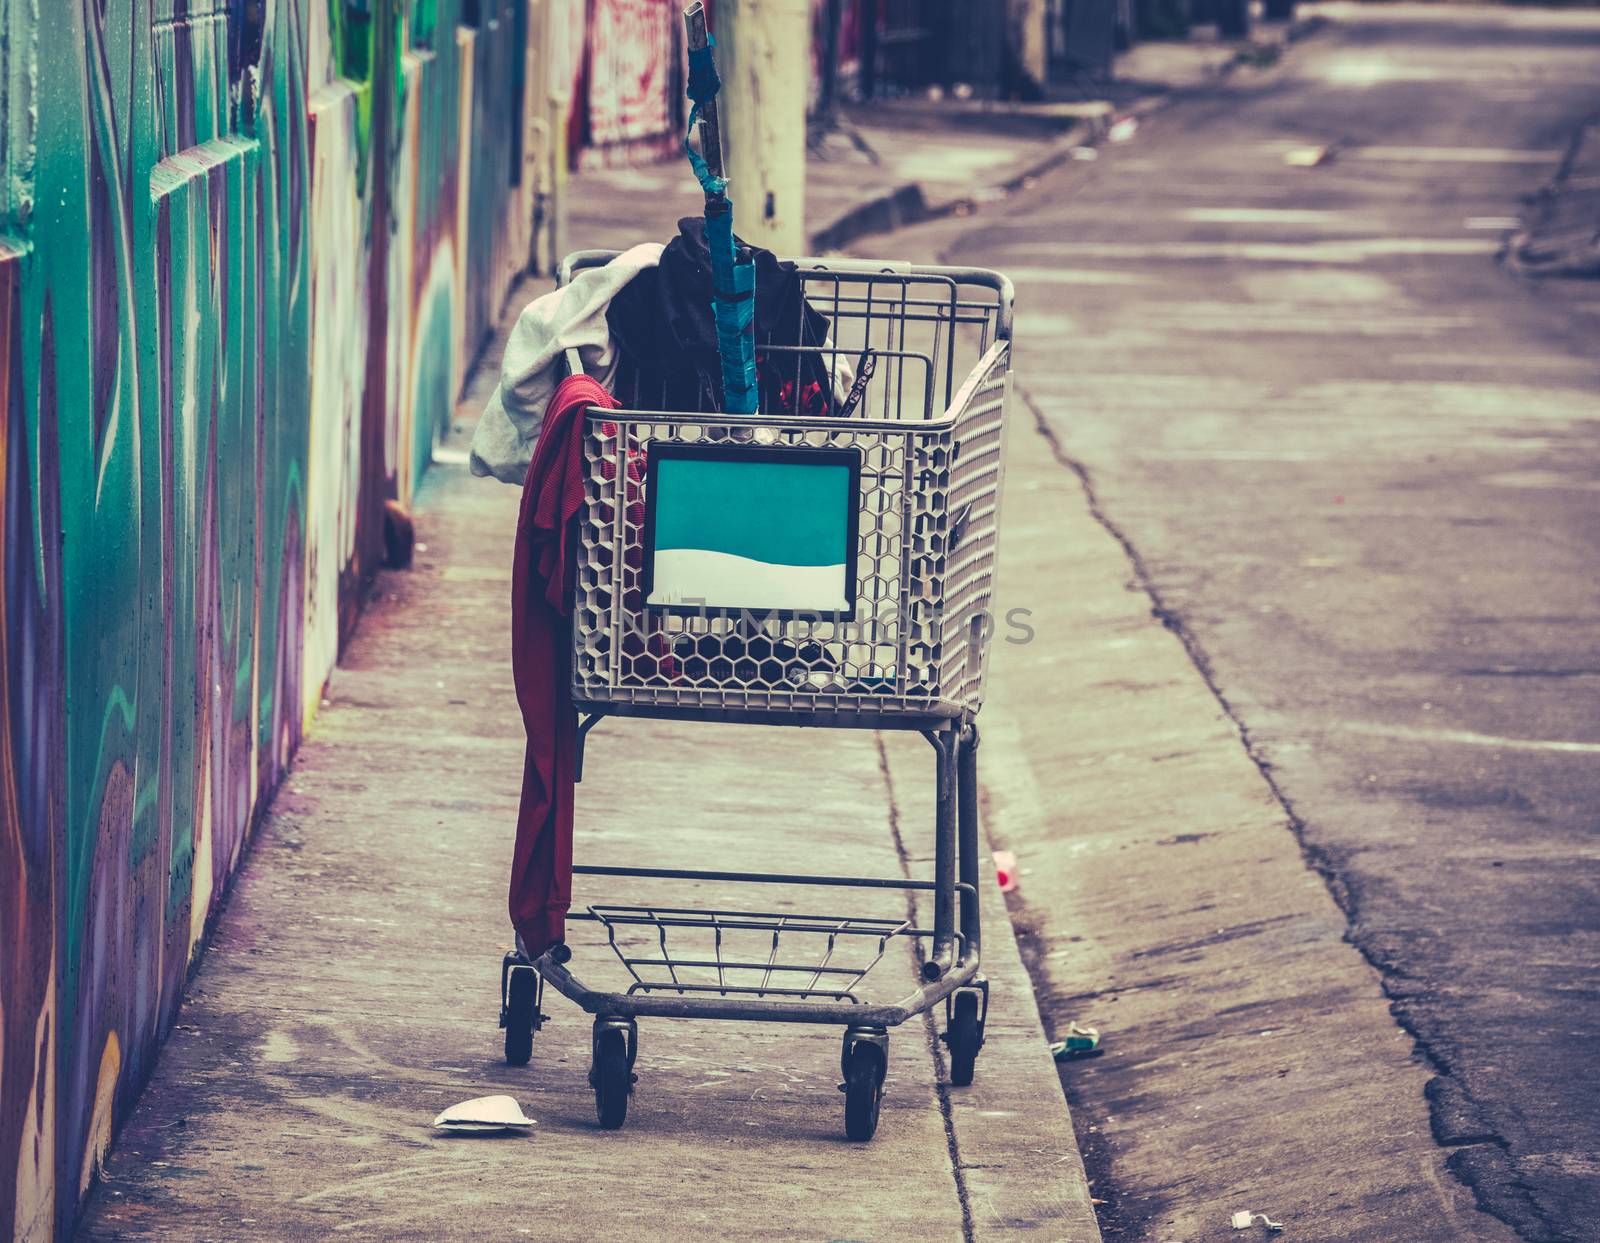 A Shooping Cart Used By A Homeless Person In San Francisco, USA